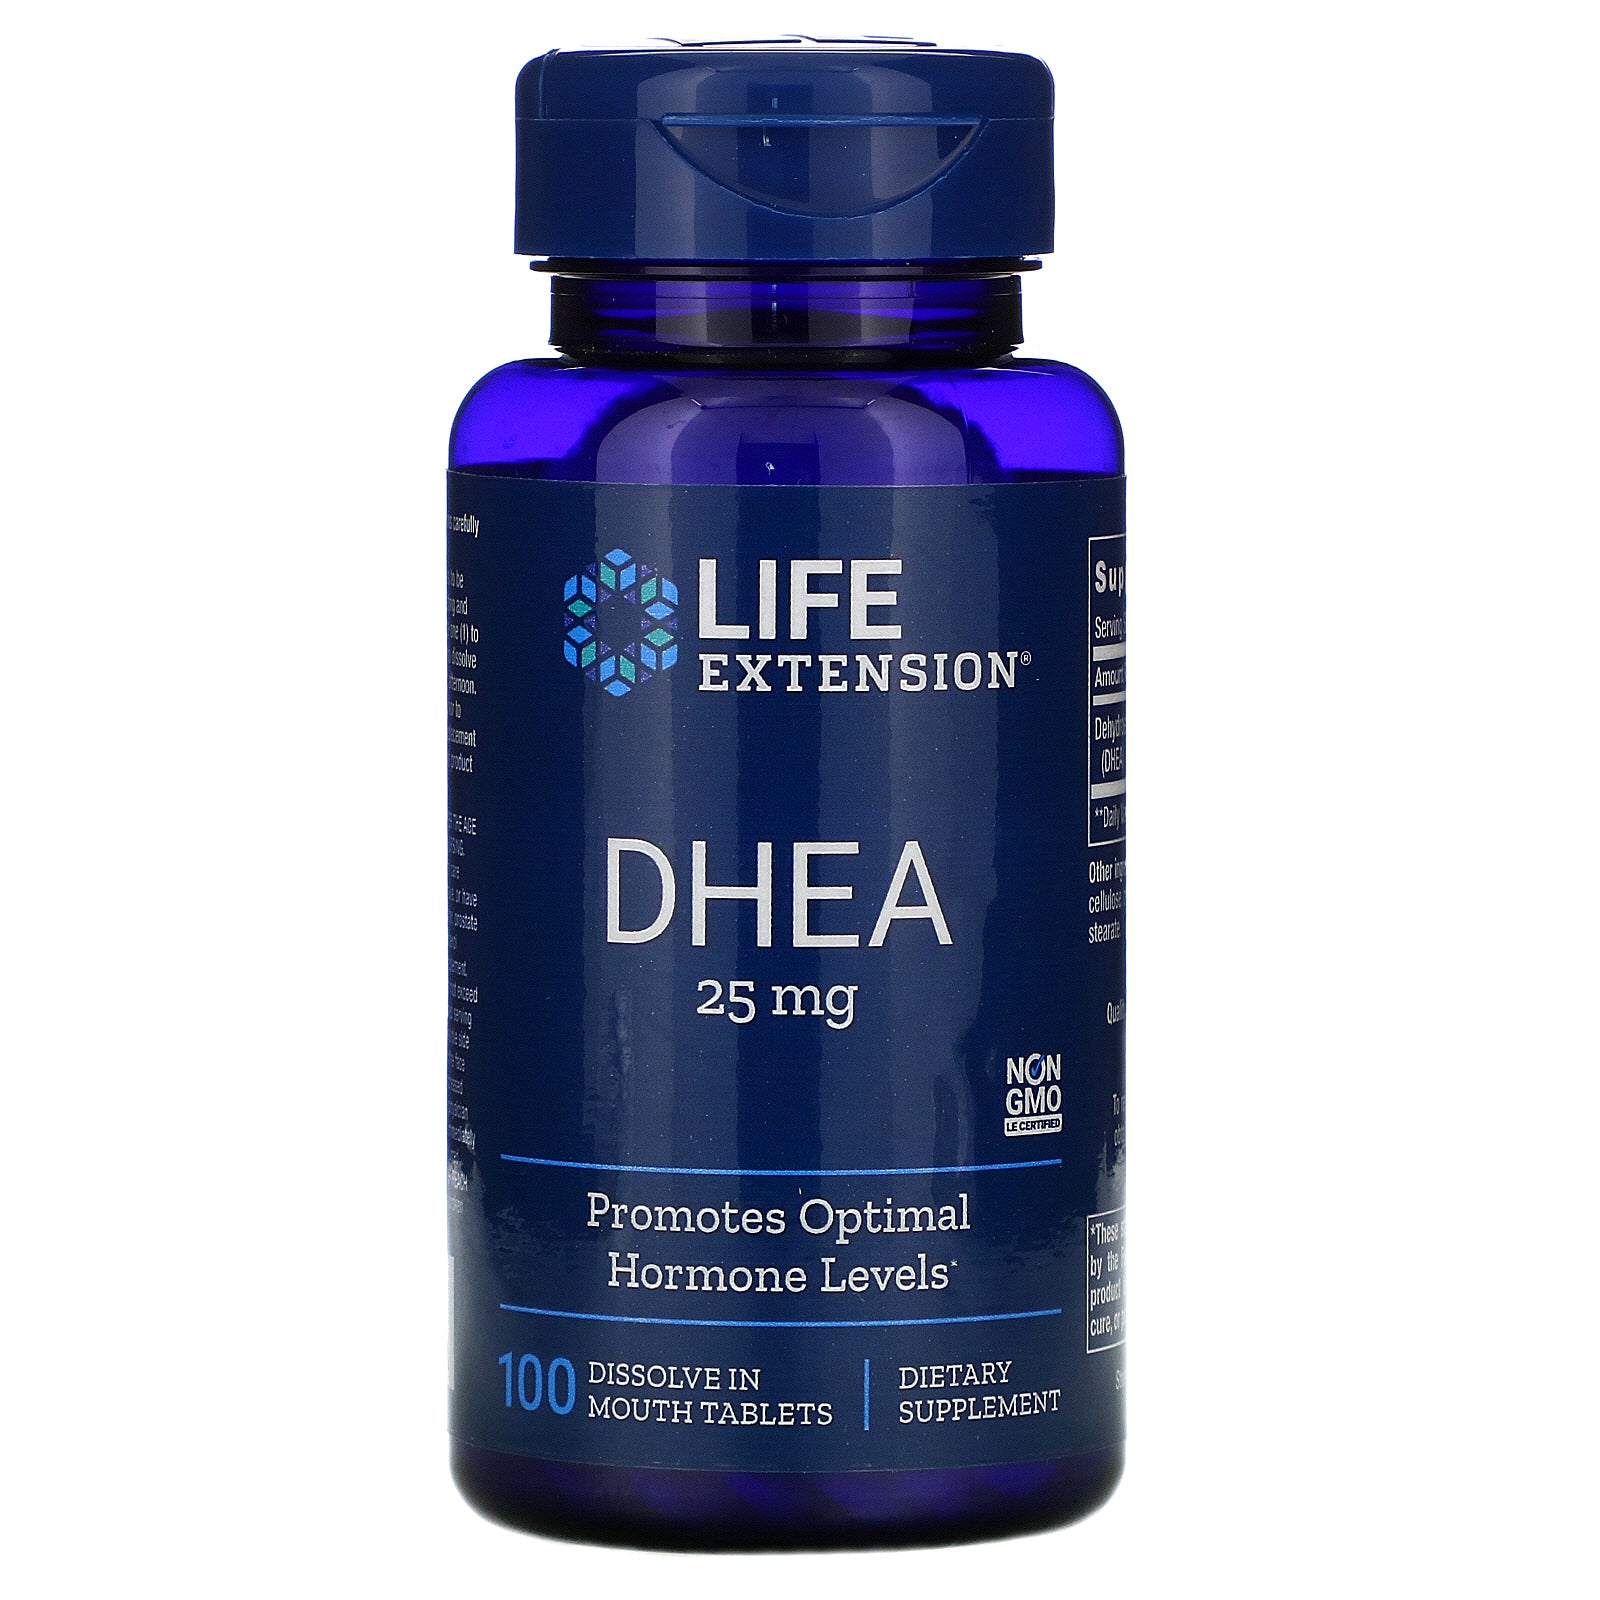 Life Extension, DHEA, 25 mg, 100 Dissolve in Mouth Tablets